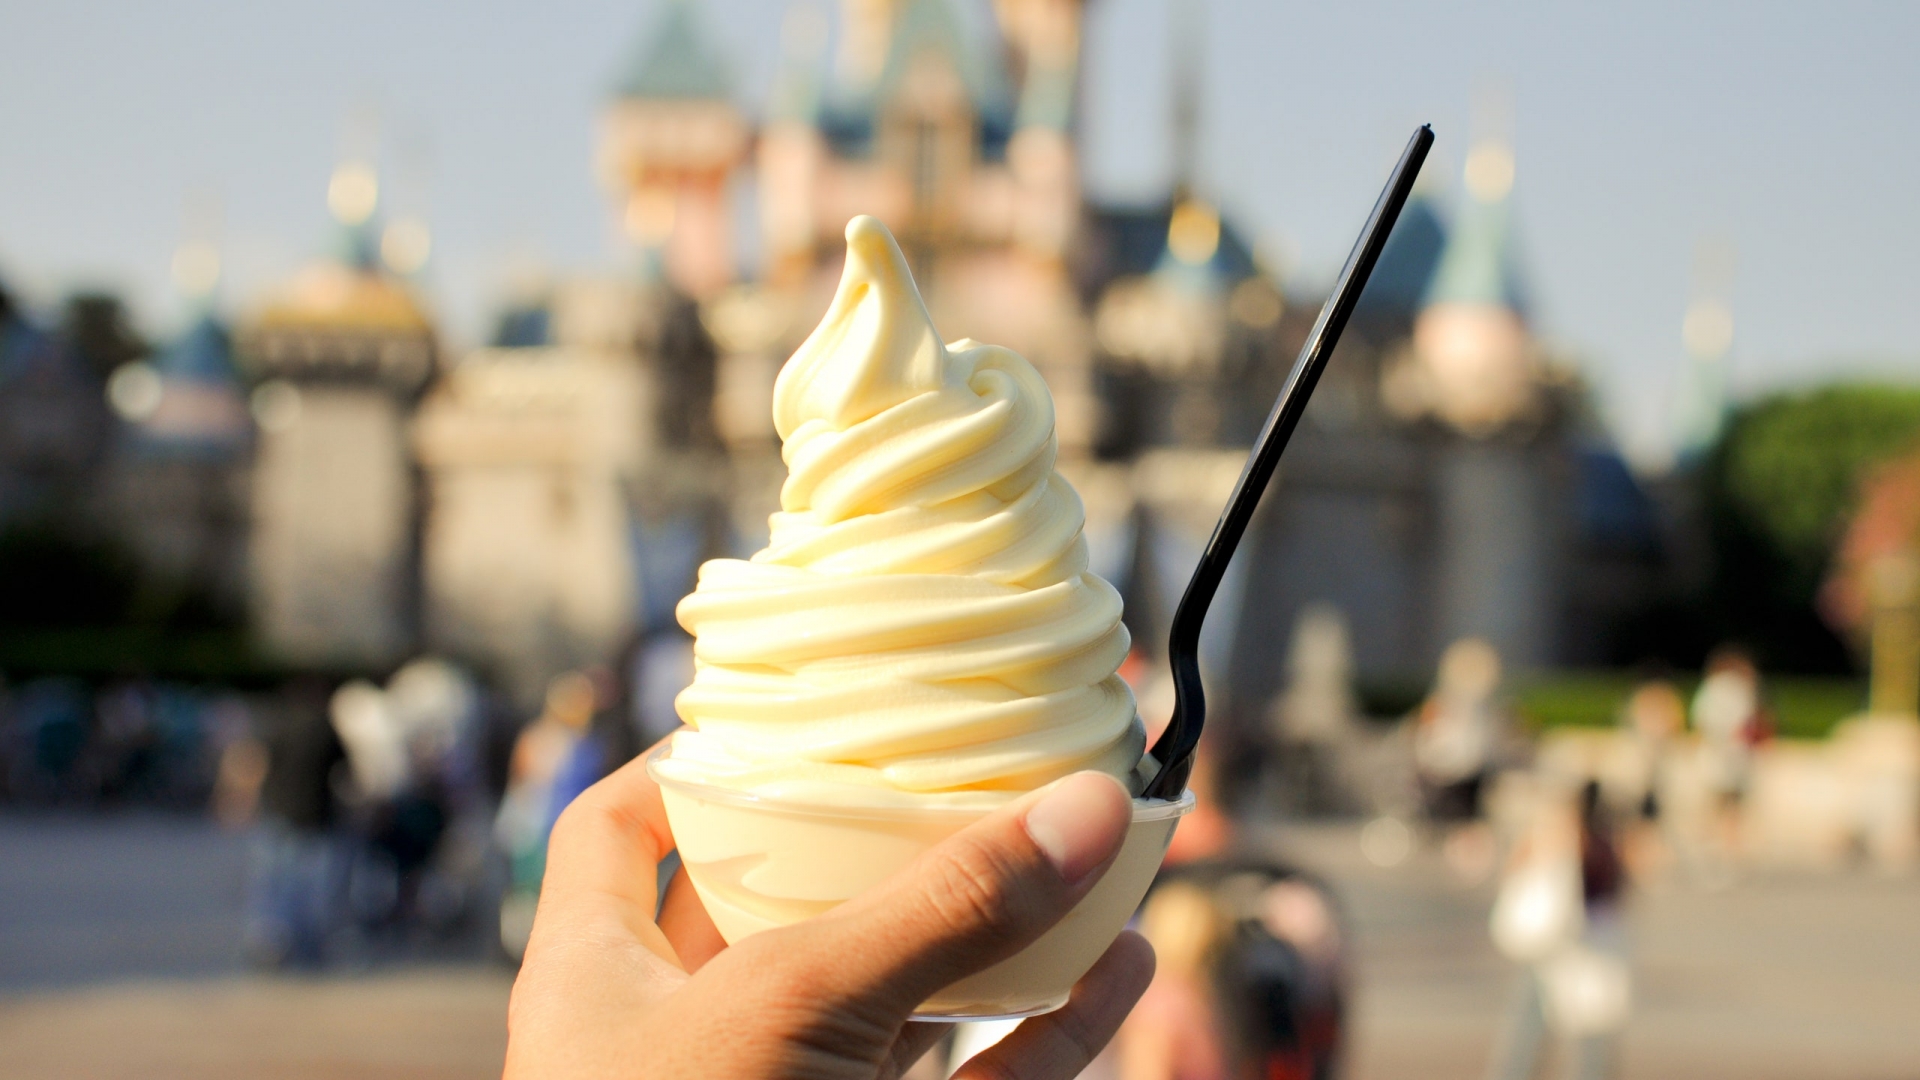 How to make Dole Whip? Simple Recipe -  Disney World hacks for 2021